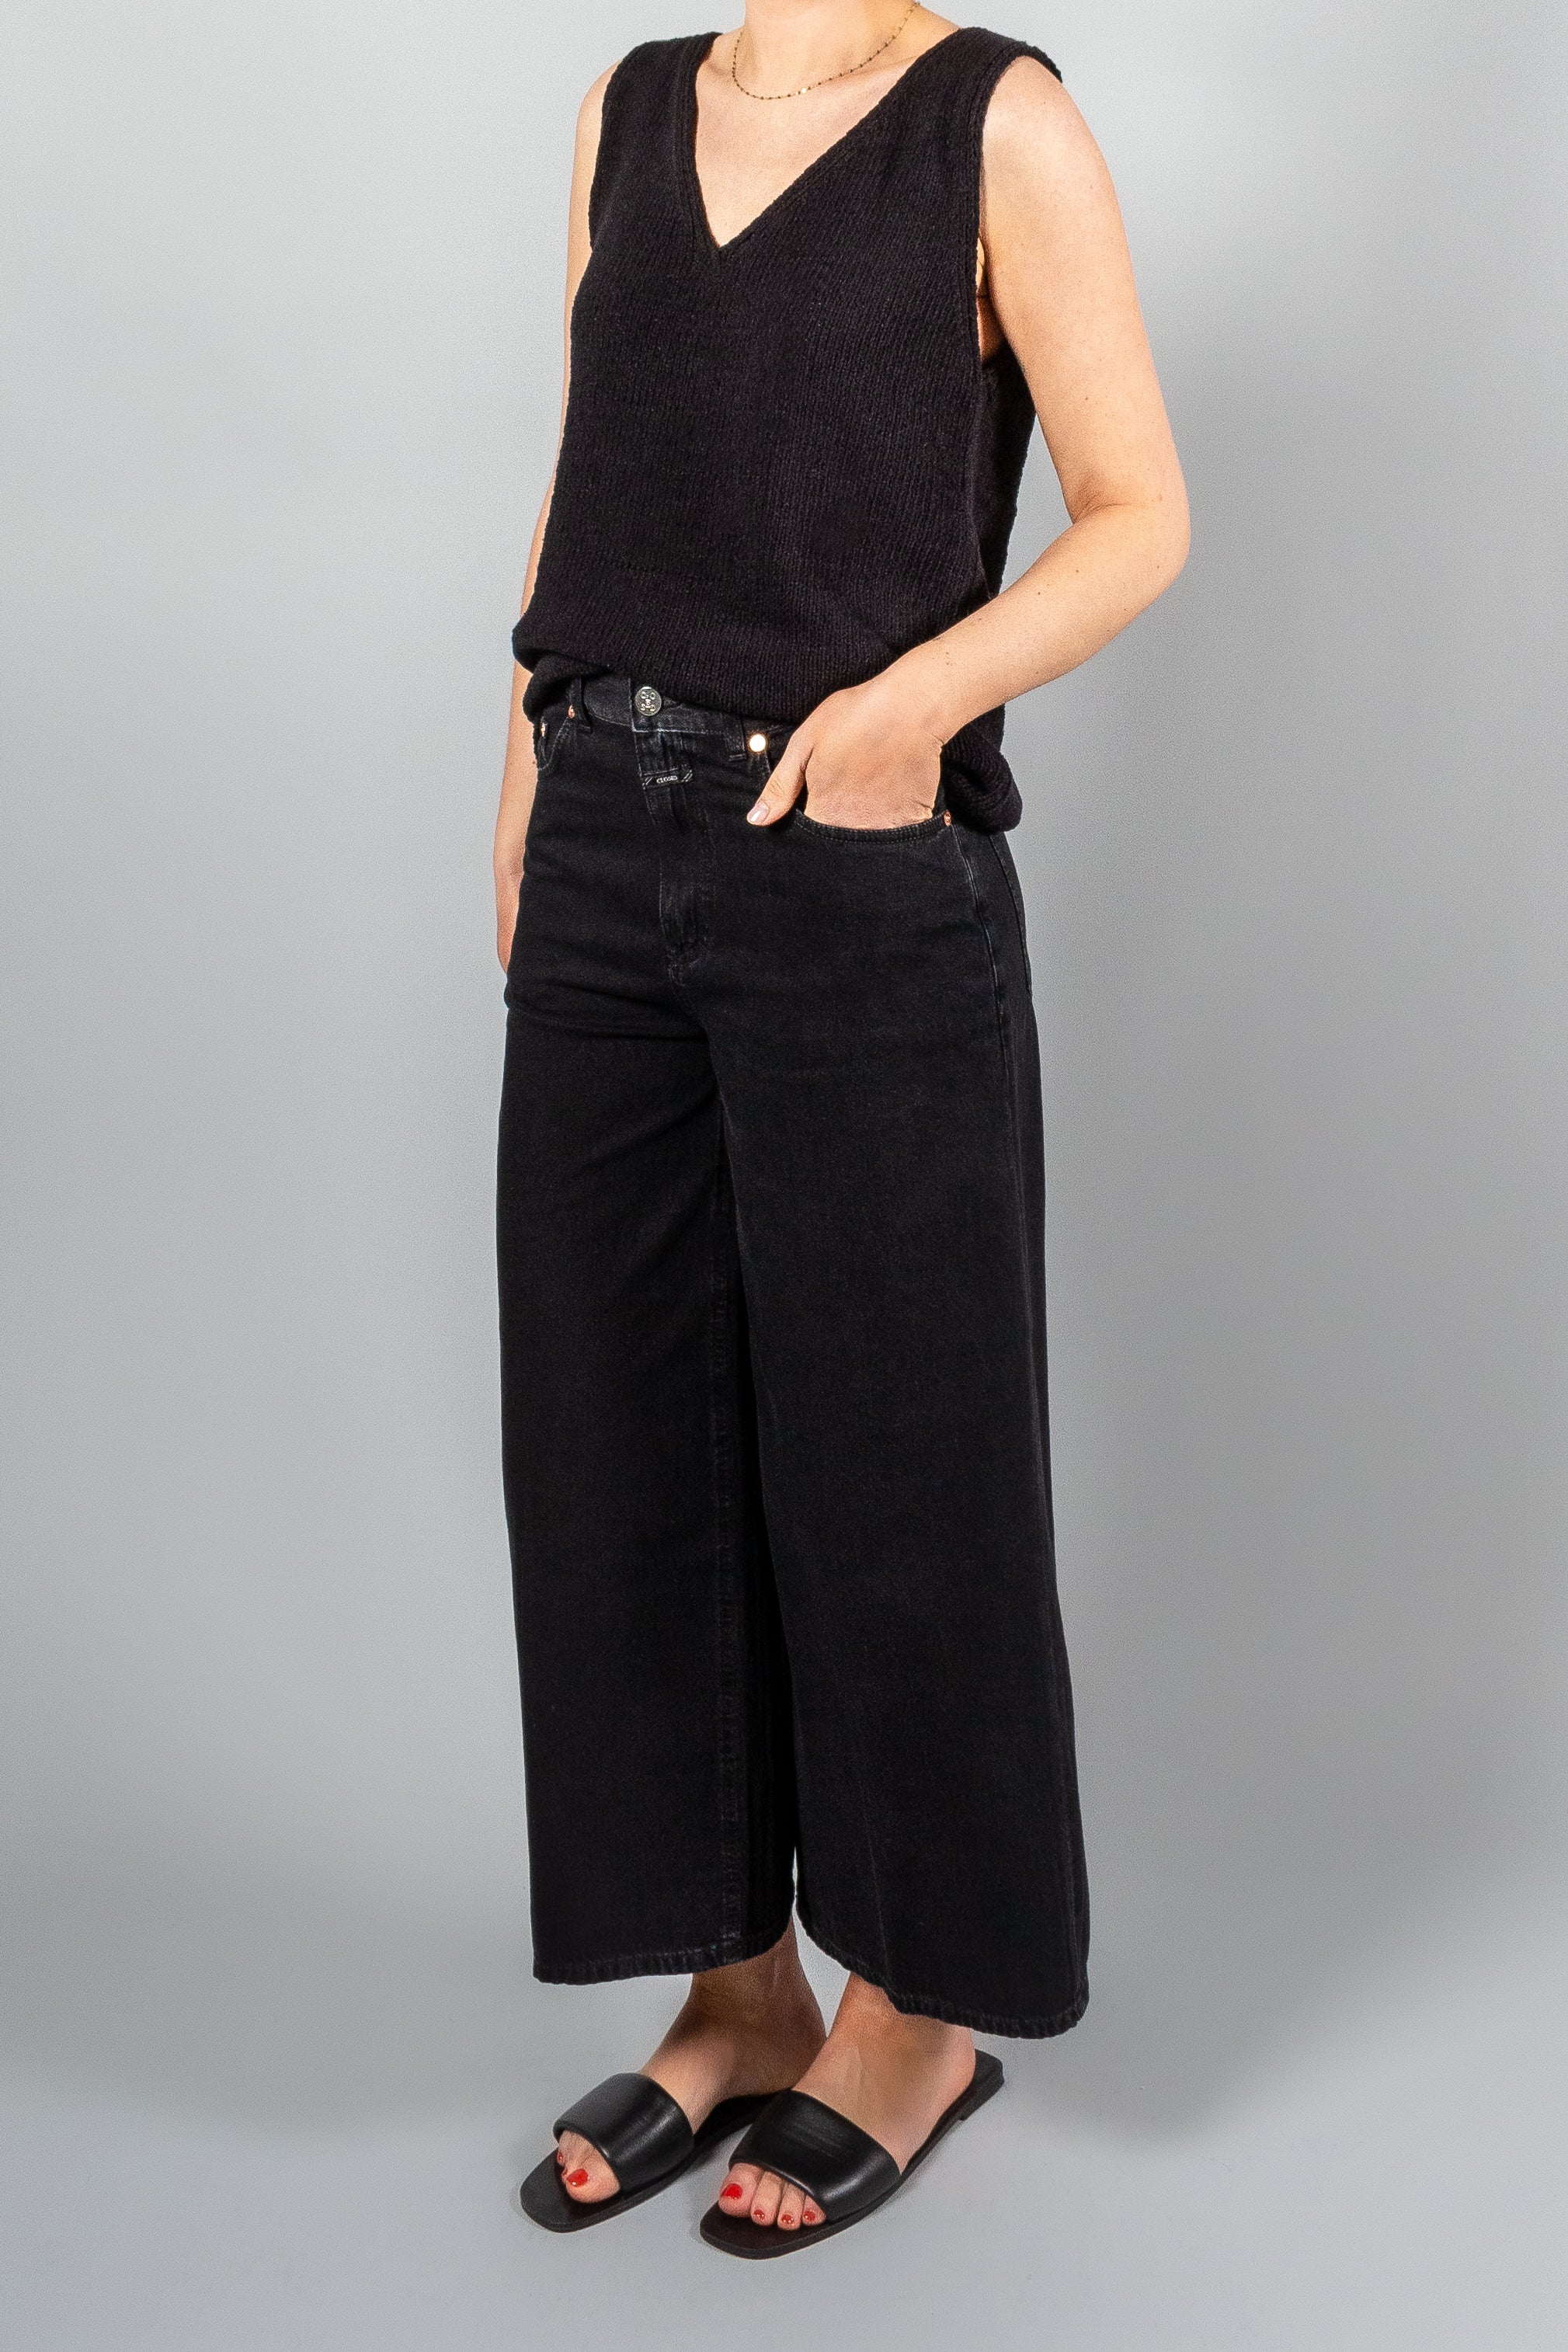 Closed Lyna Denim-Pants and Shorts-Misch-Boutique-Vancouver-Canada-misch.ca